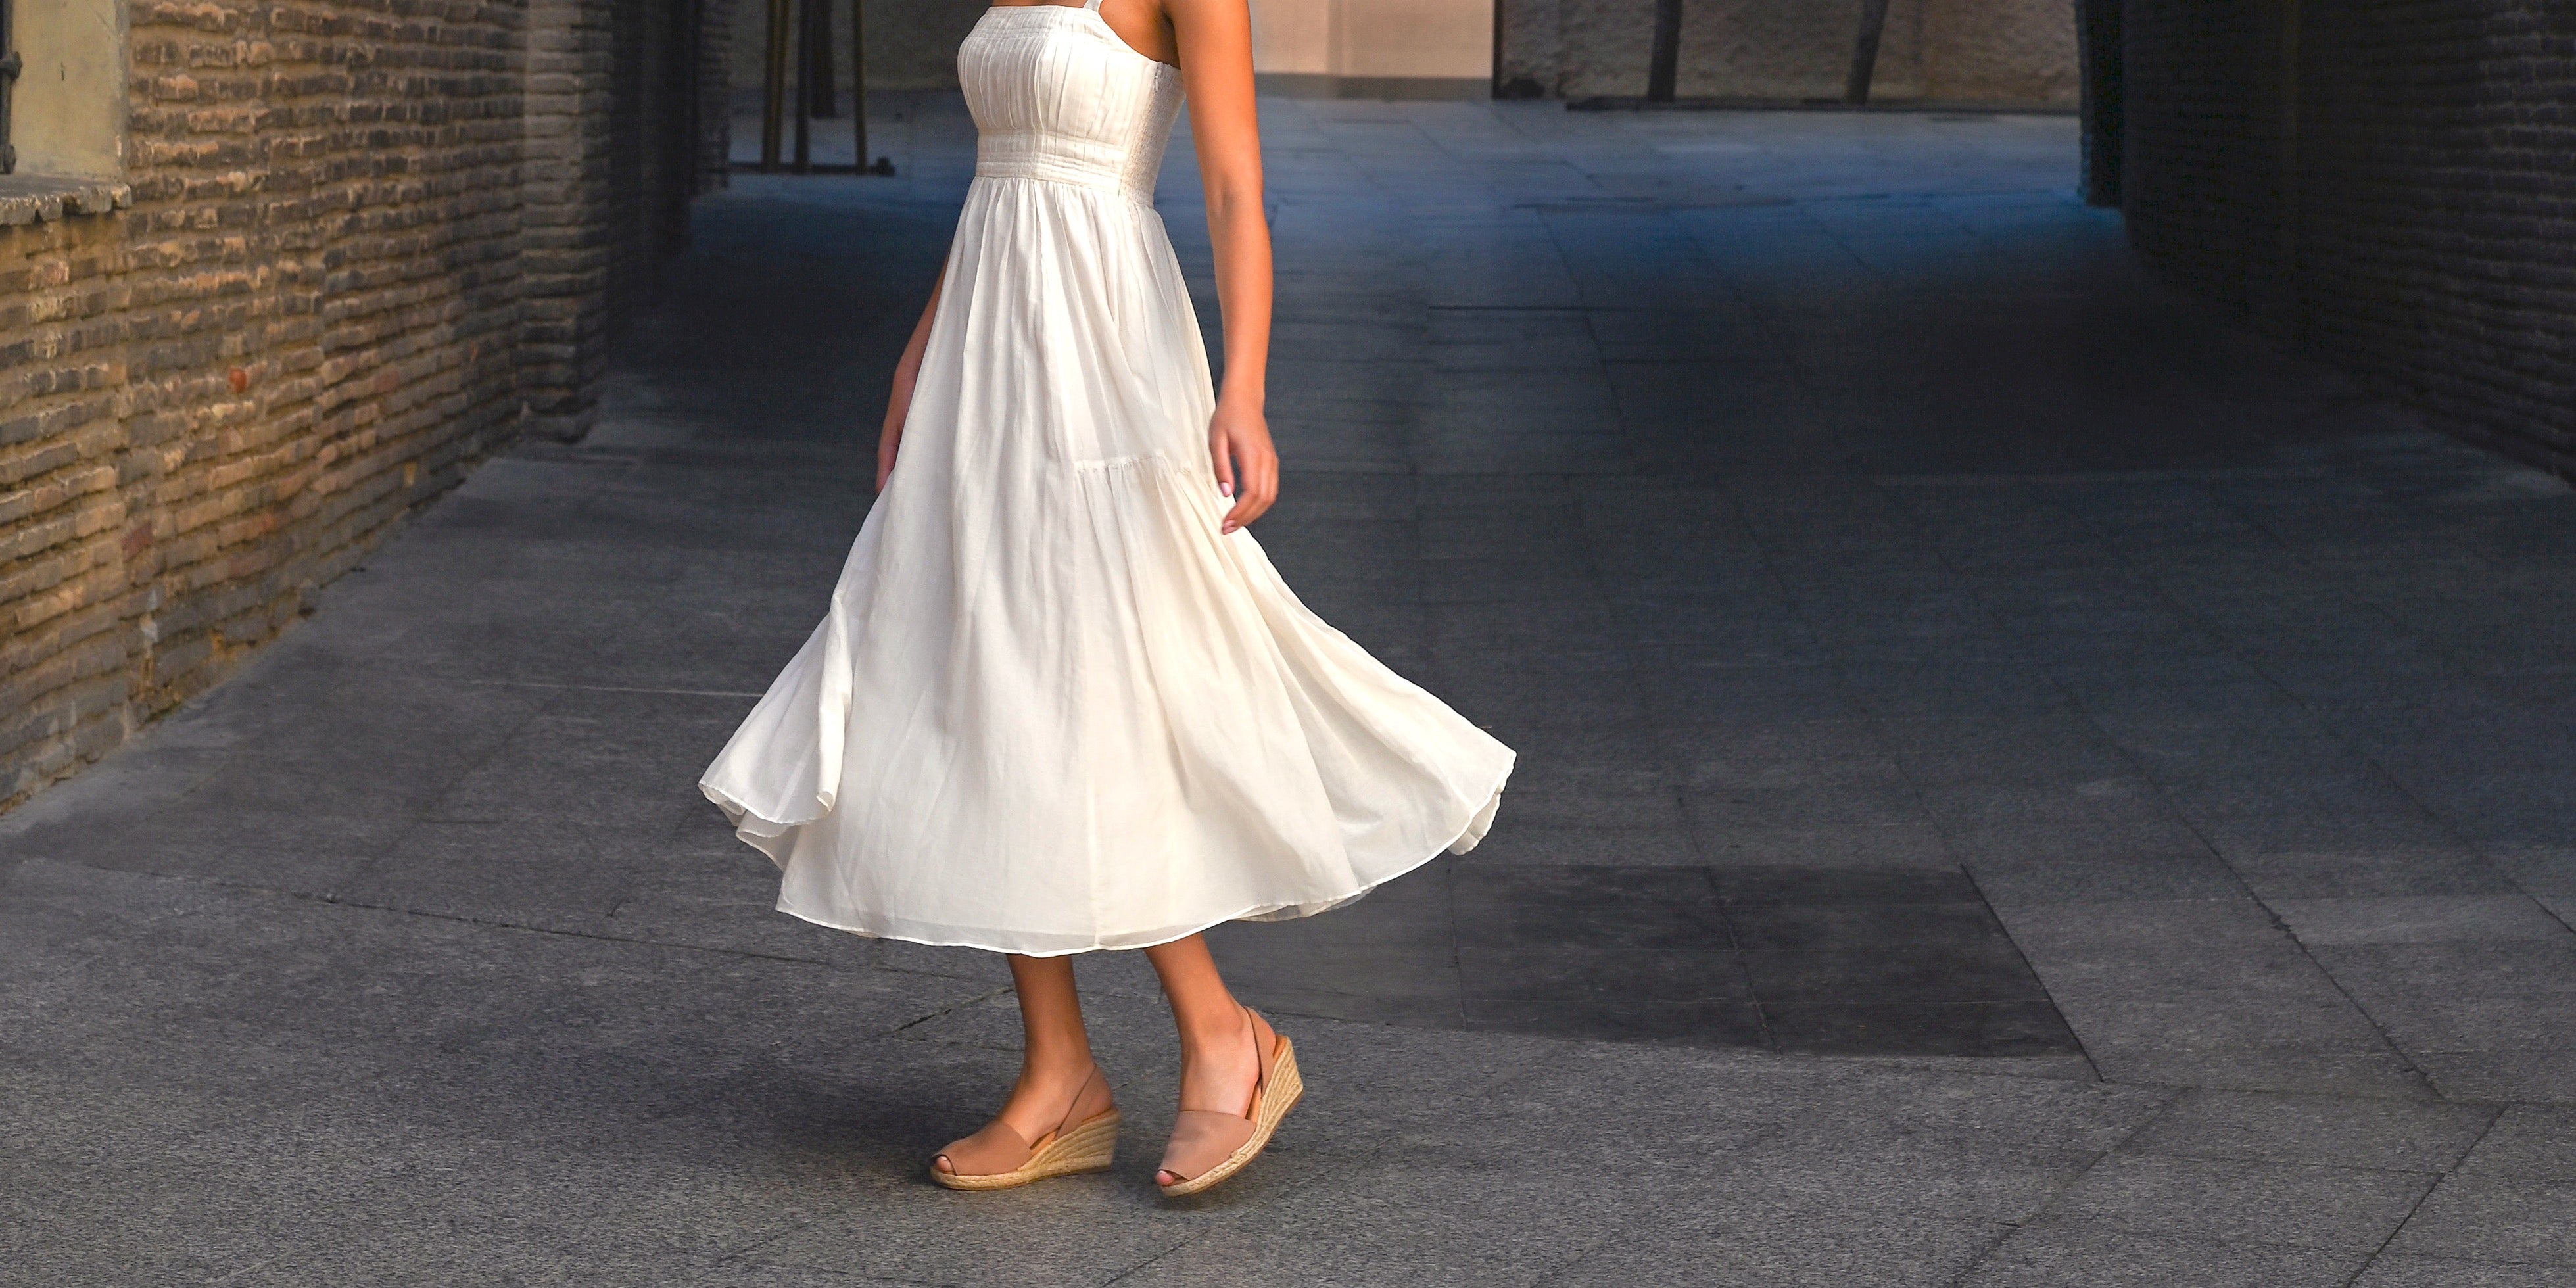 Woman twirling while wearing white dress and tan nubuck wedge sandals